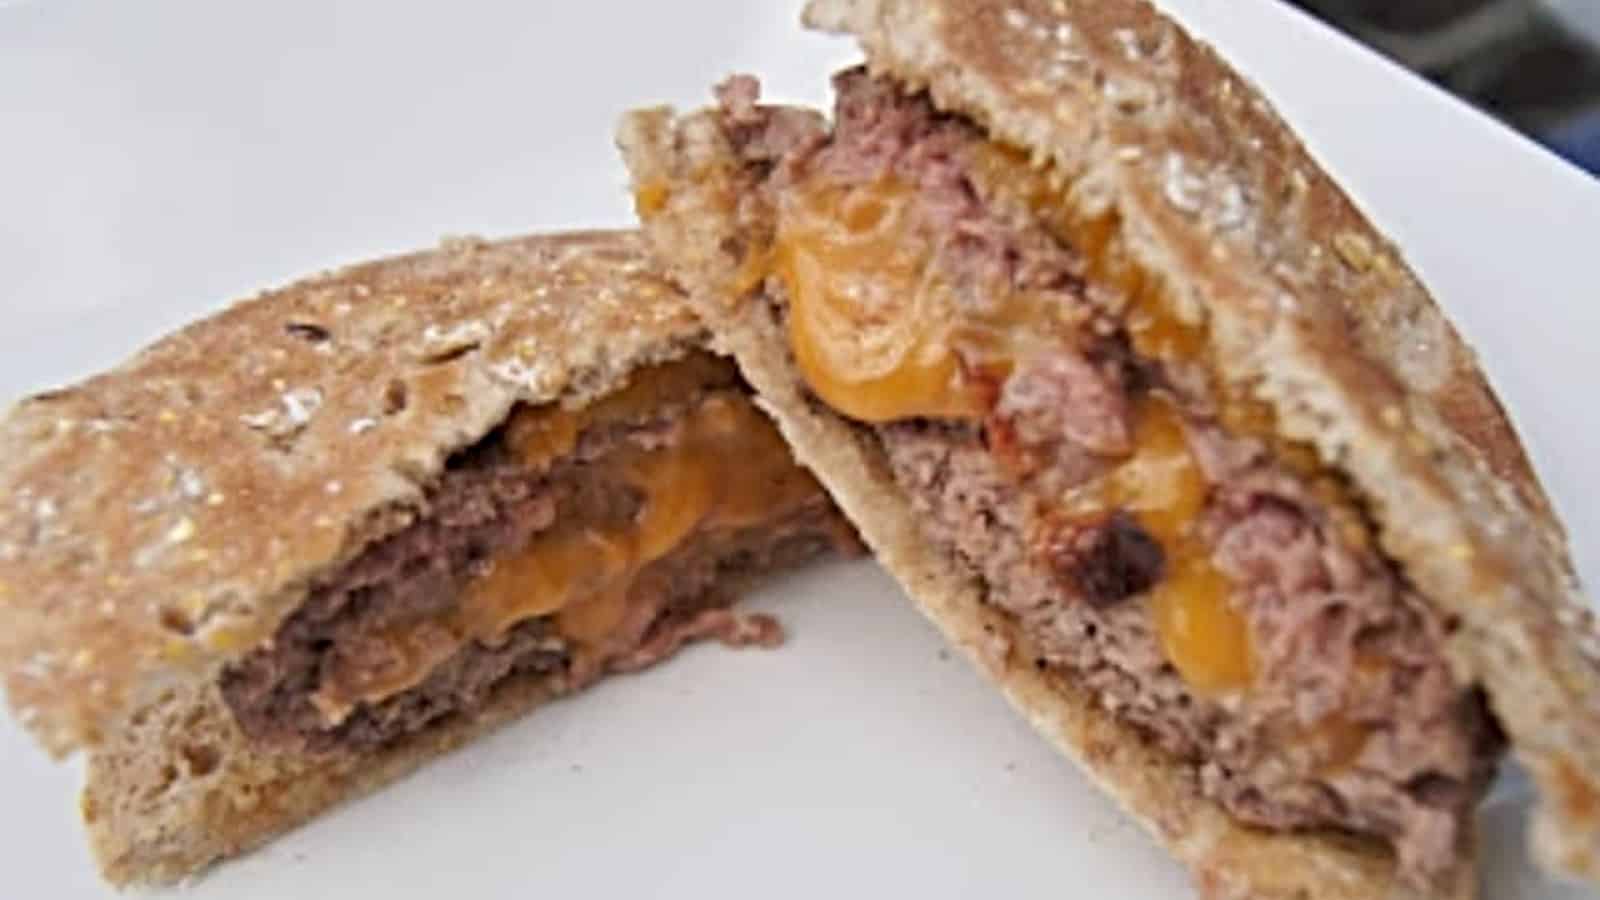 Bacon cheddar stuffed burger cut in half and on a white plate.